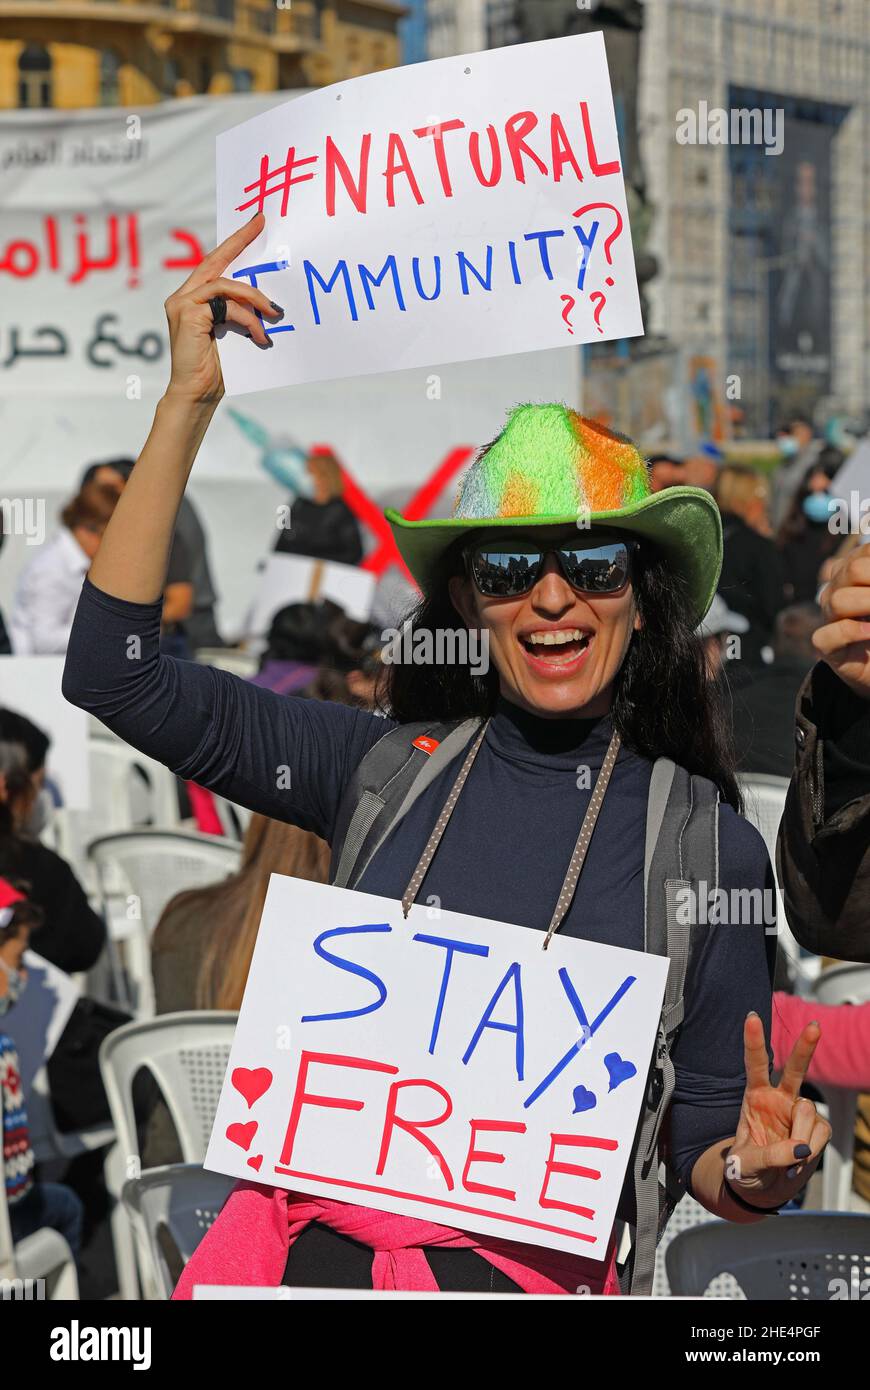 (220109) -- BEIRUT, Jan. 9, 2022 (Xinhua) -- A protester holds placards at Martyrs' Square in central Beirut, Lebanon on Jan. 8, 2022. Dozens of Lebanese gathered at Martyrs' Square in central Beirut, Lebanon on Saturday, refusing to have vaccinations and demanding freedom of choice amid surge in COVID-19 cases in the country. Meanwhile, with 7,547 new COVID-19 cases registered nationwide on Saturday, the COVID-19 Omicron wave that started three weeks ago in Lebanon has turned into a 'tsunami,' warned the country's Health Minister Firas Abiad. The national tally now stood at 769,400, and Stock Photo